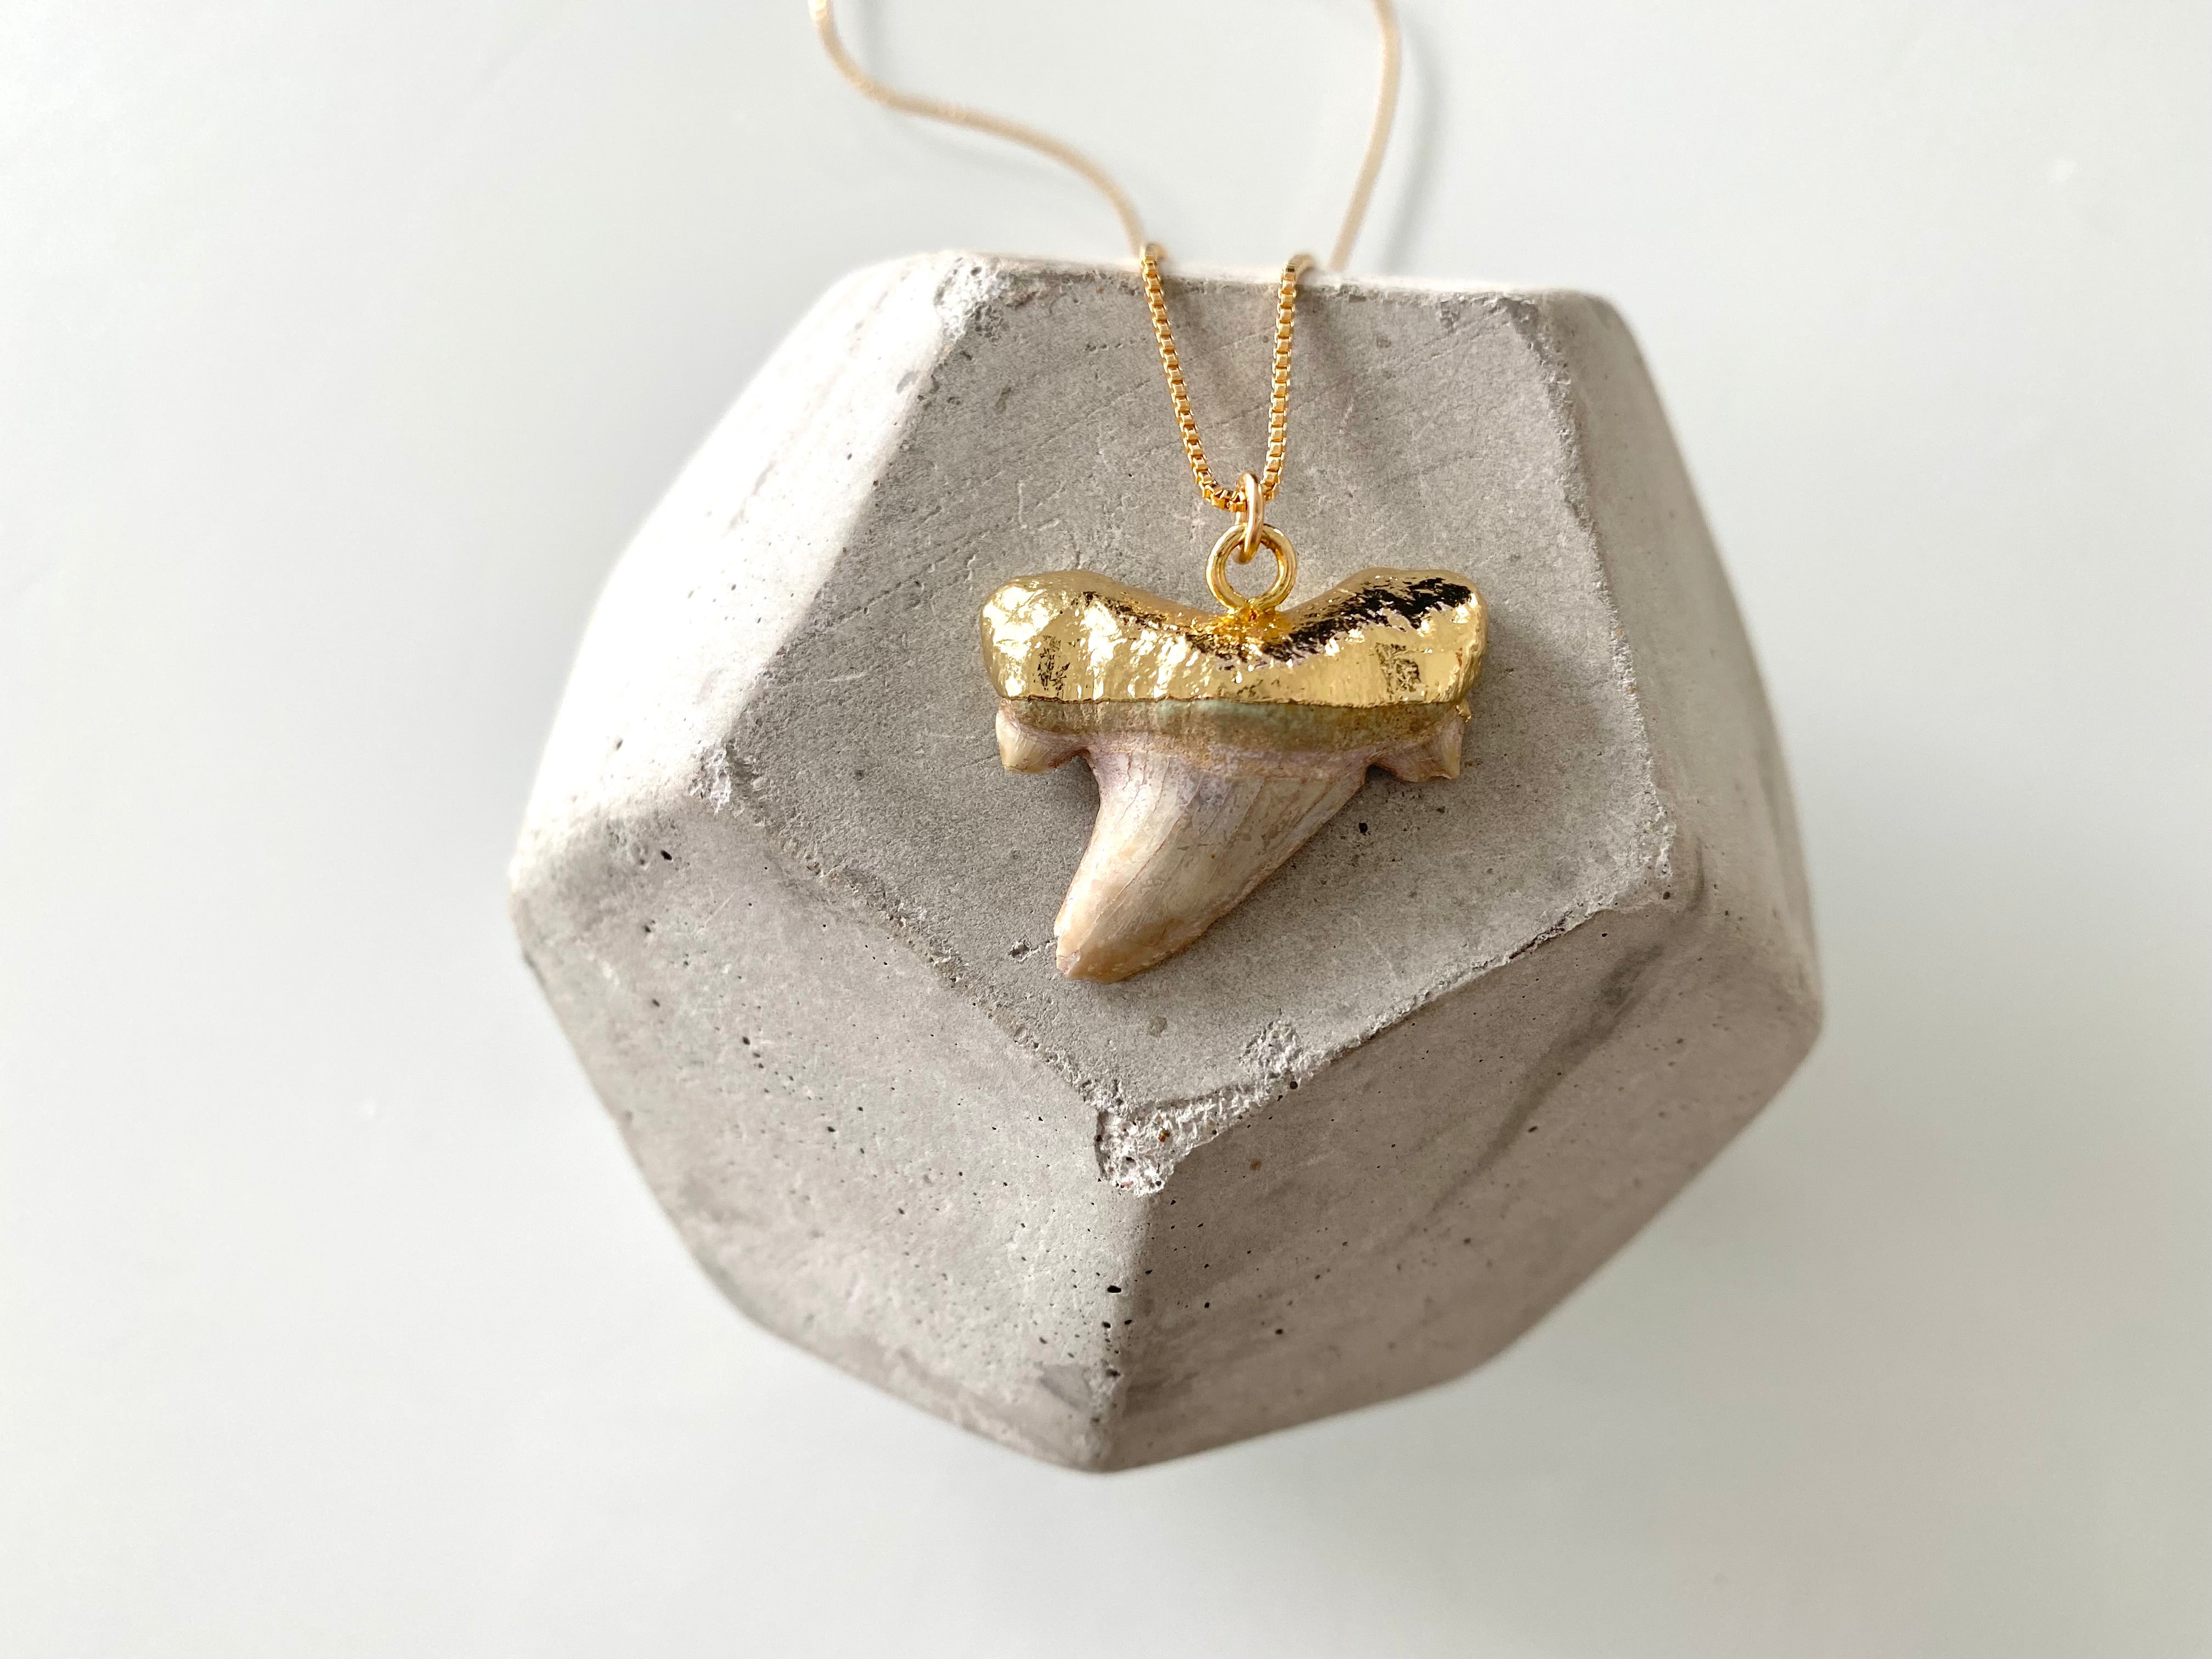 Genuine Chunky Shark Tooth Pendant Necklace - Gold